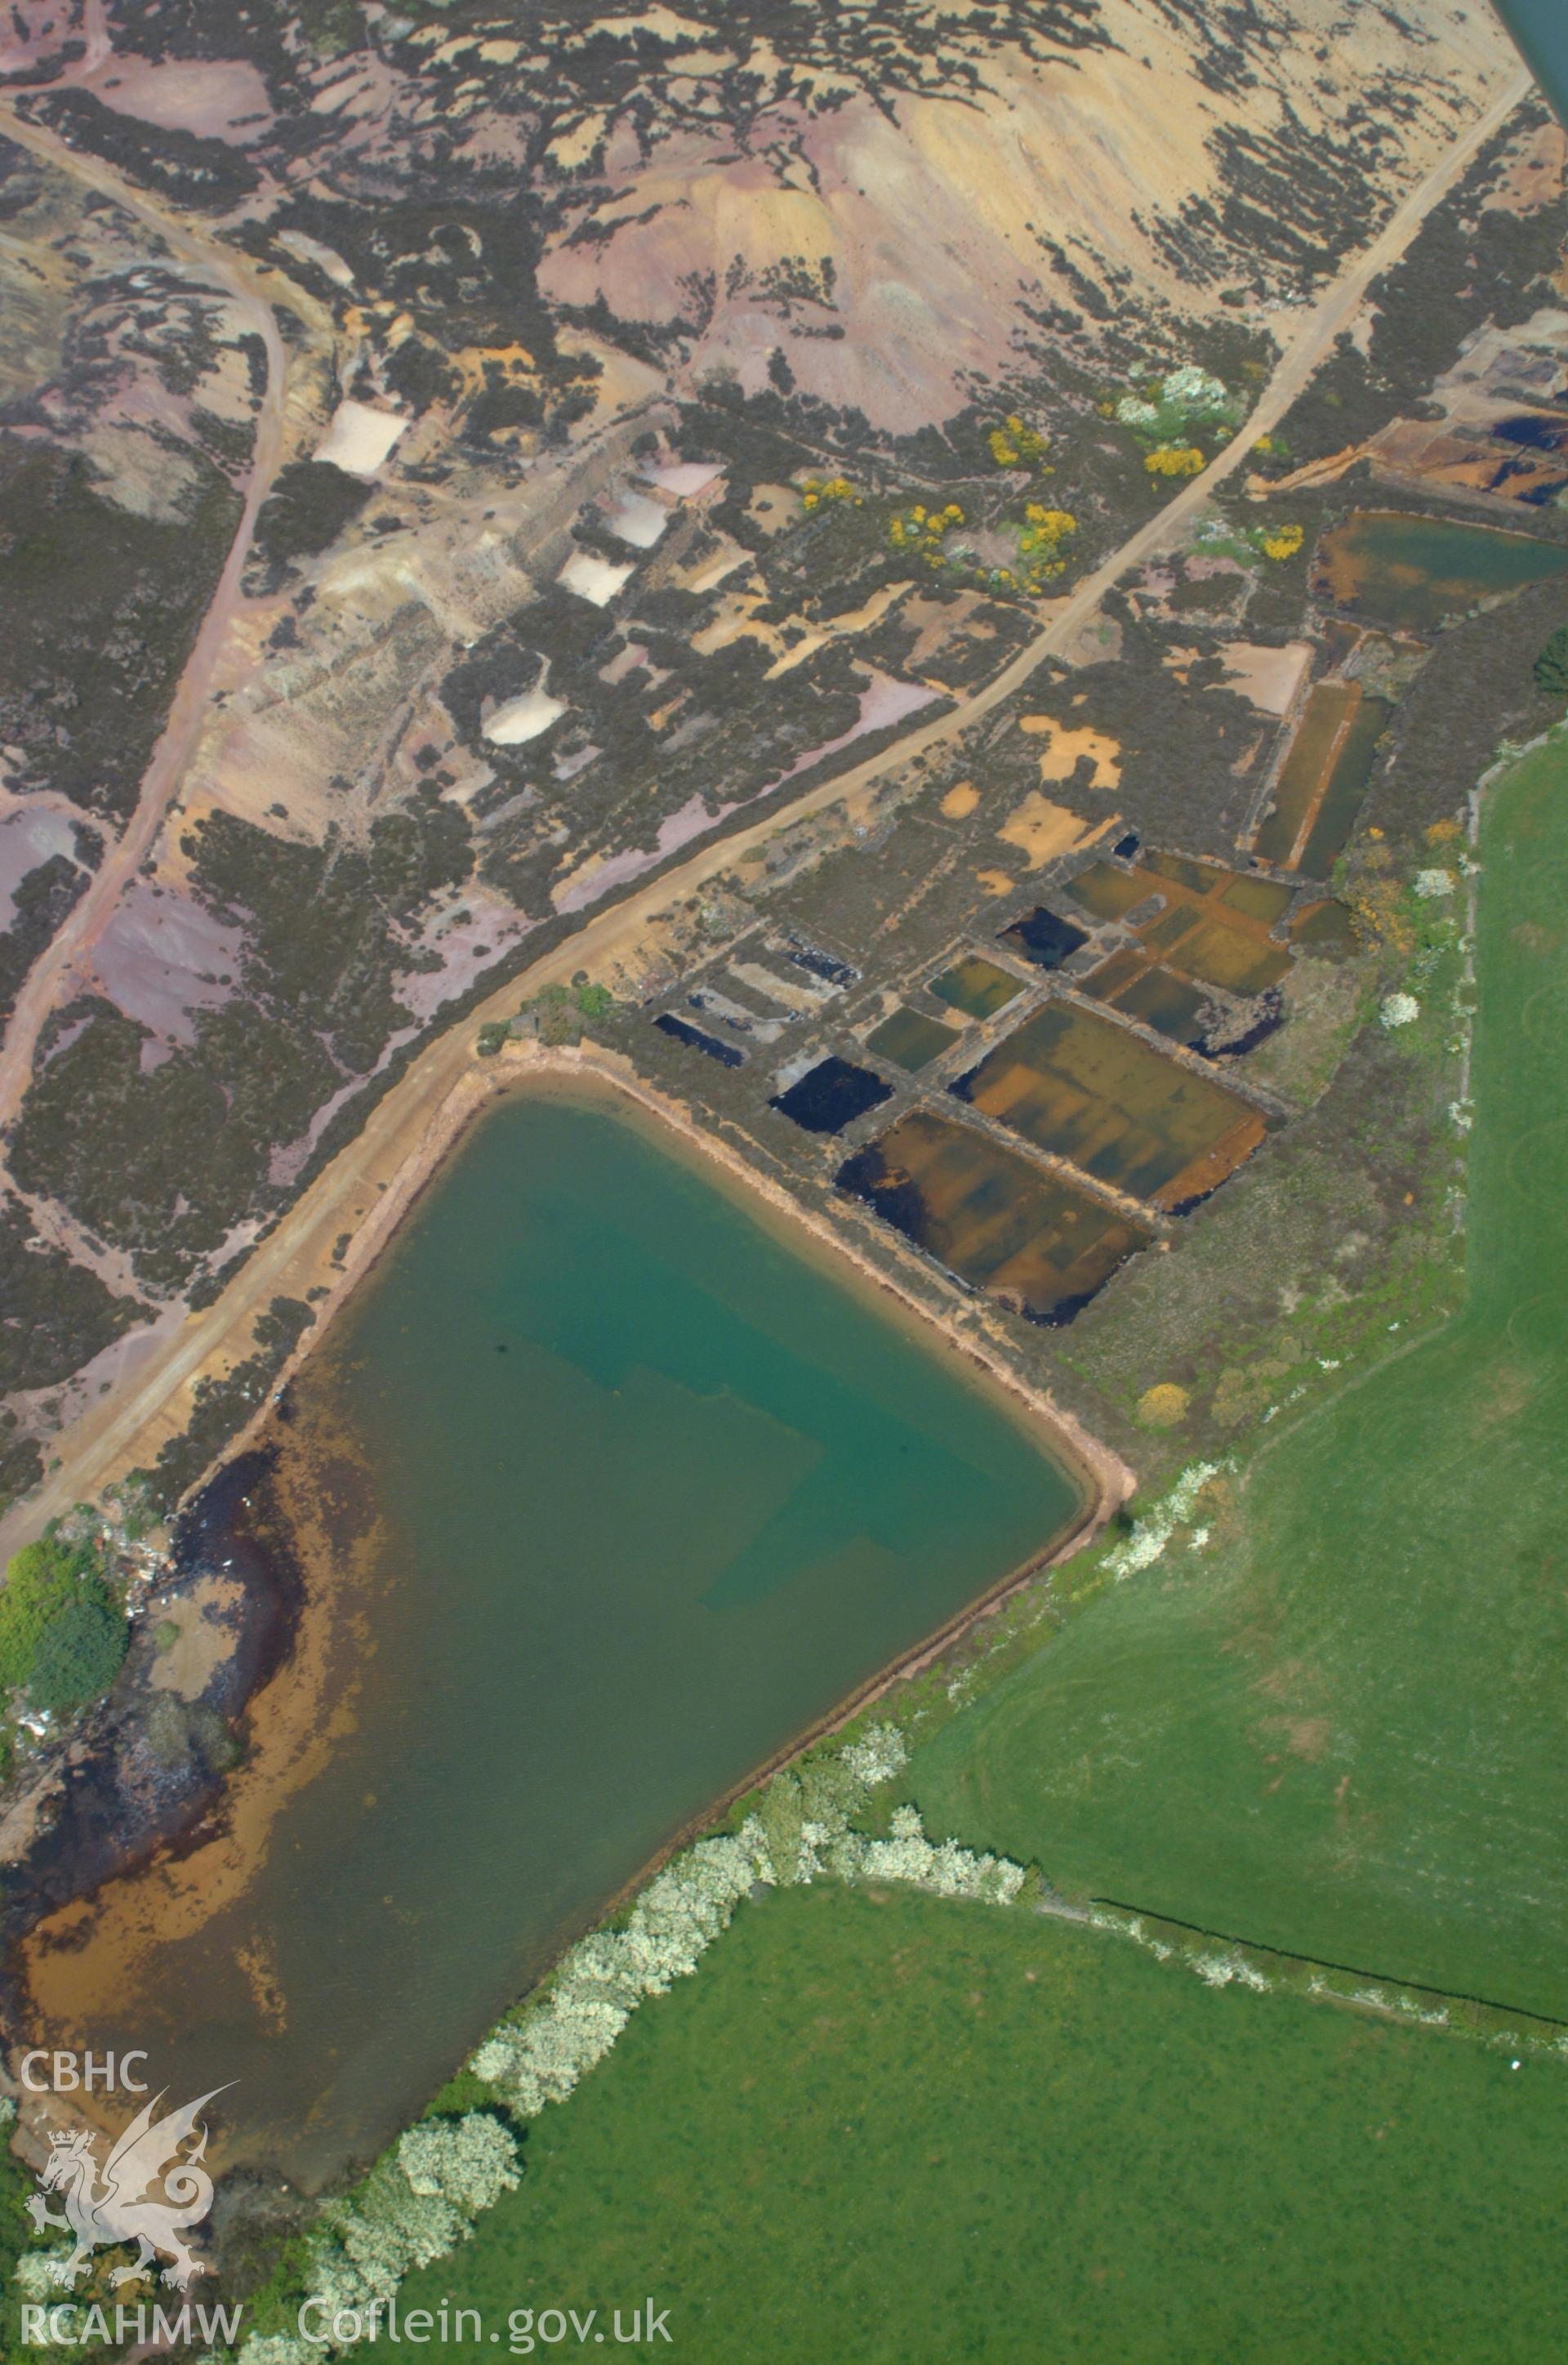 RCAHMW colour oblique aerial photograph of Pond Complex, Parys Mountain. Taken on 26 May 2004 by Toby Driver